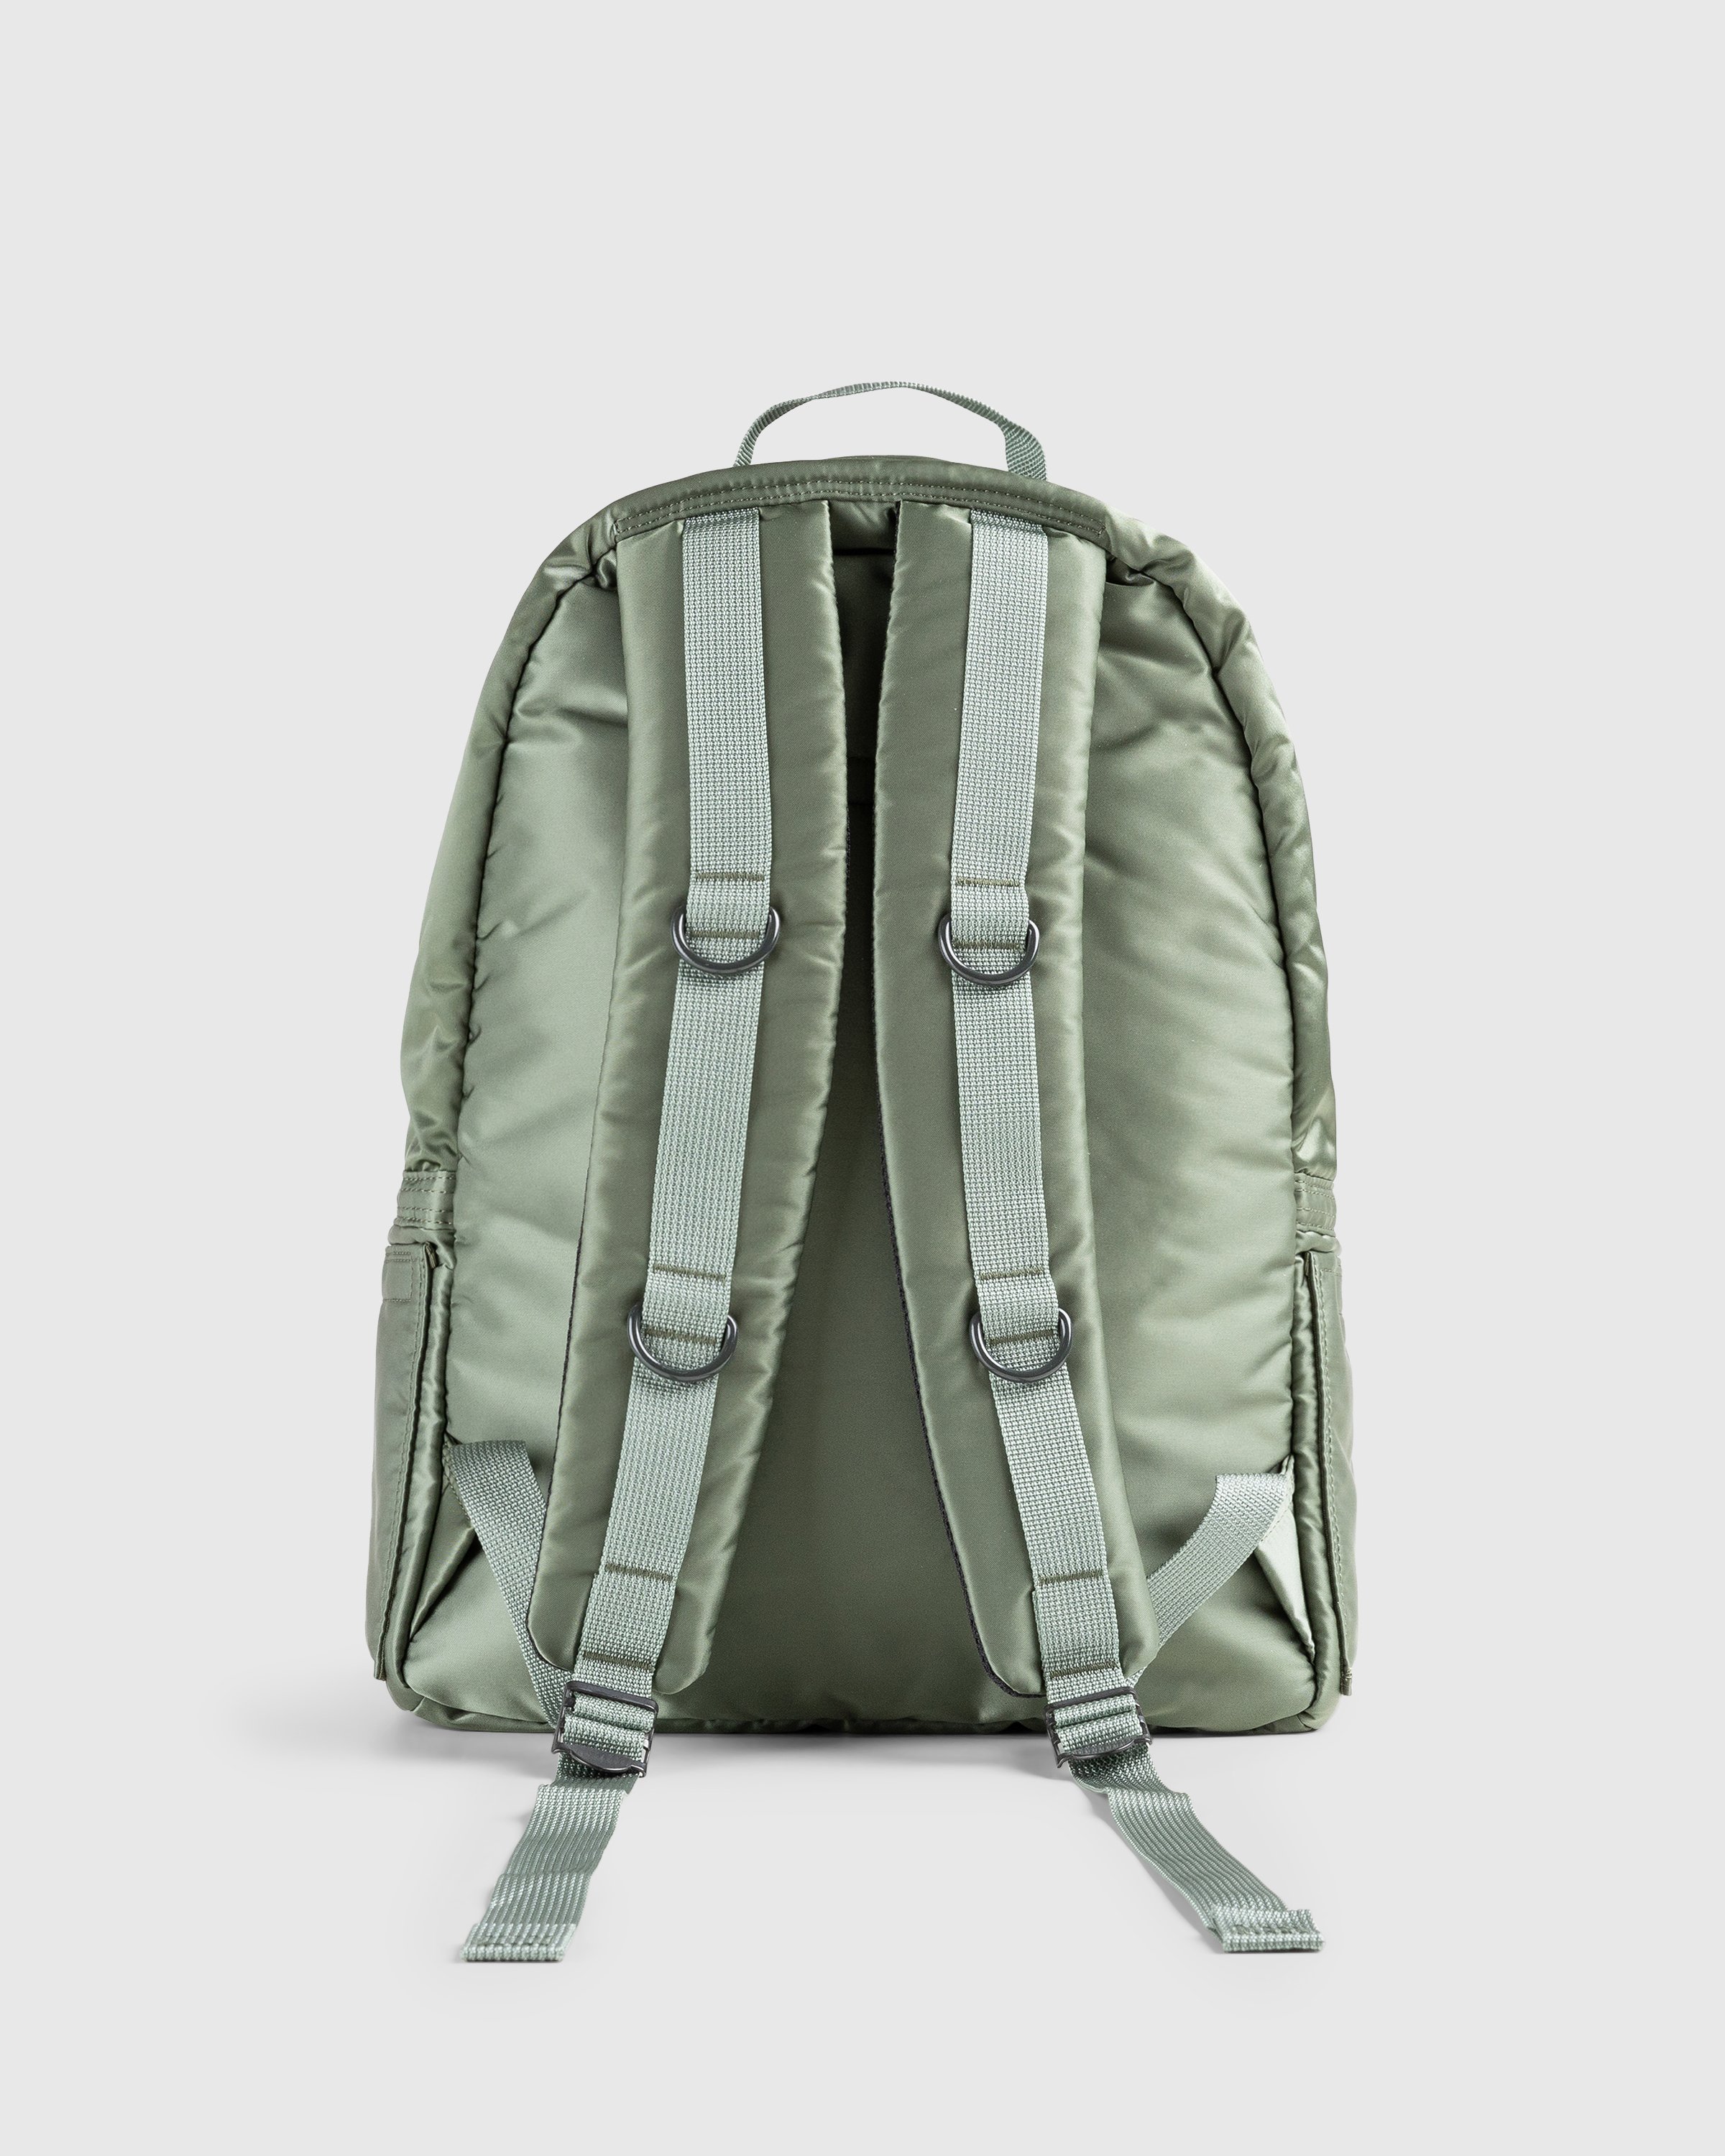 Porter-Yoshida & Co. - Tanker Day Pack - Accessories - Green - Image 2